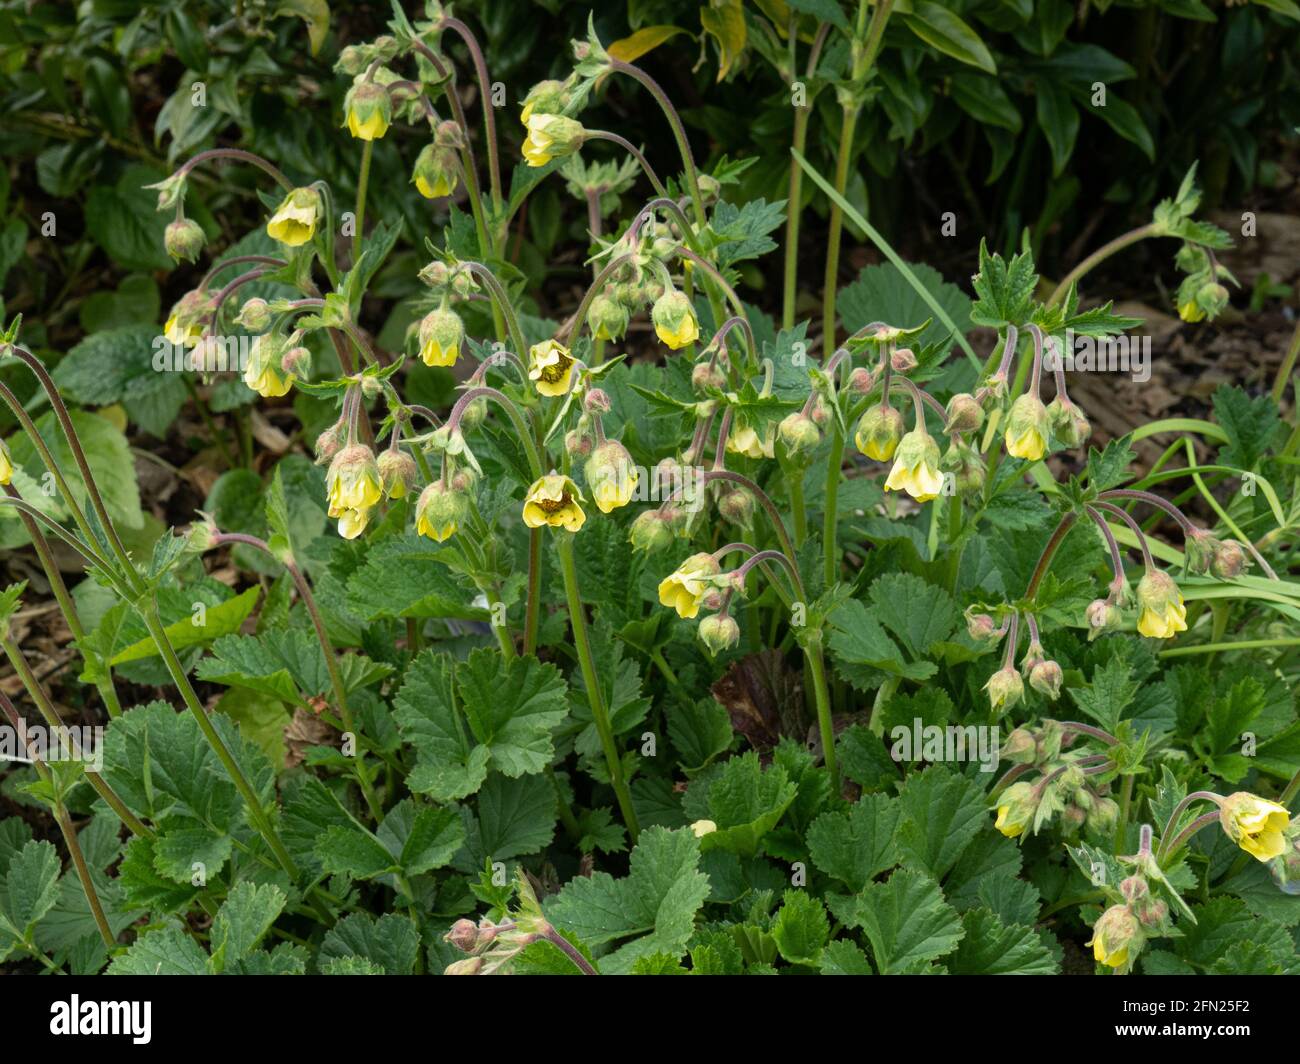 A plant of Geum x intermedium growing in the front of a borfder showing the yellow hanging bell-shaped flowers Stock Photo